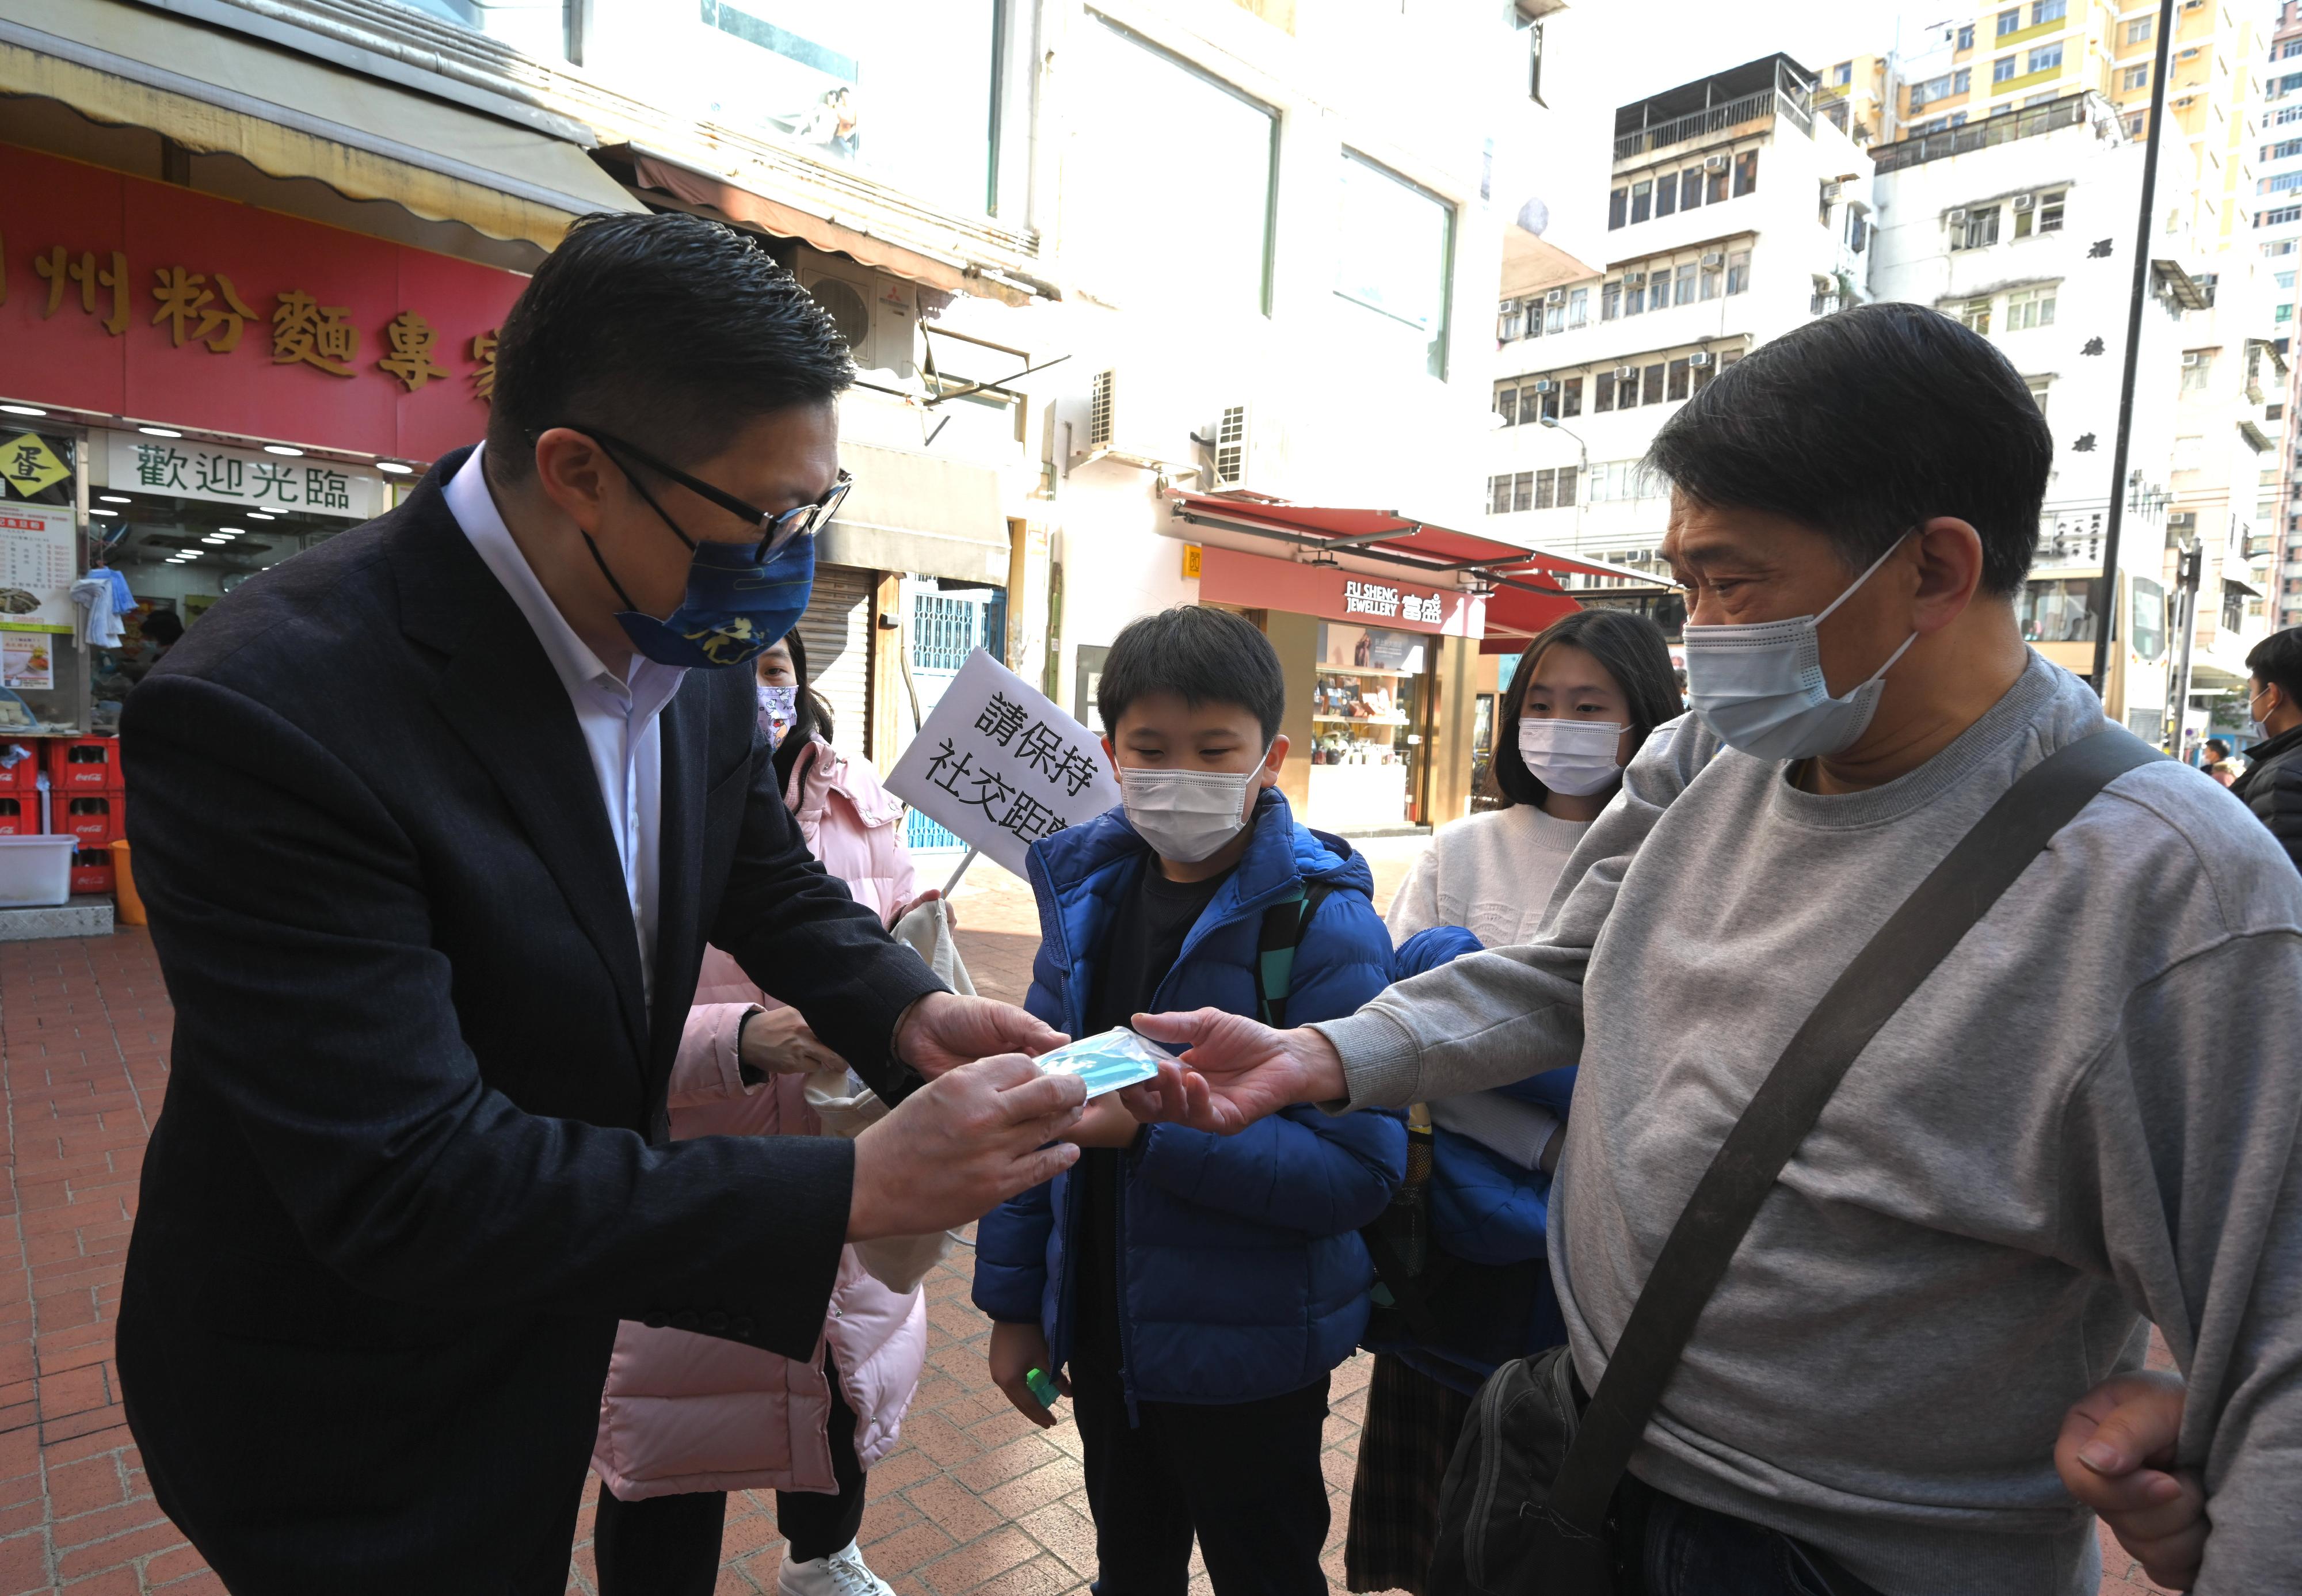 The Secretary for Security, Mr Tang Ping-keung (first left), distributes COVID-19 rapid test kits at On Tat Square in Yuen Long today (February 4) and calls on residents to undergo voluntary testing and help fight the virus together.